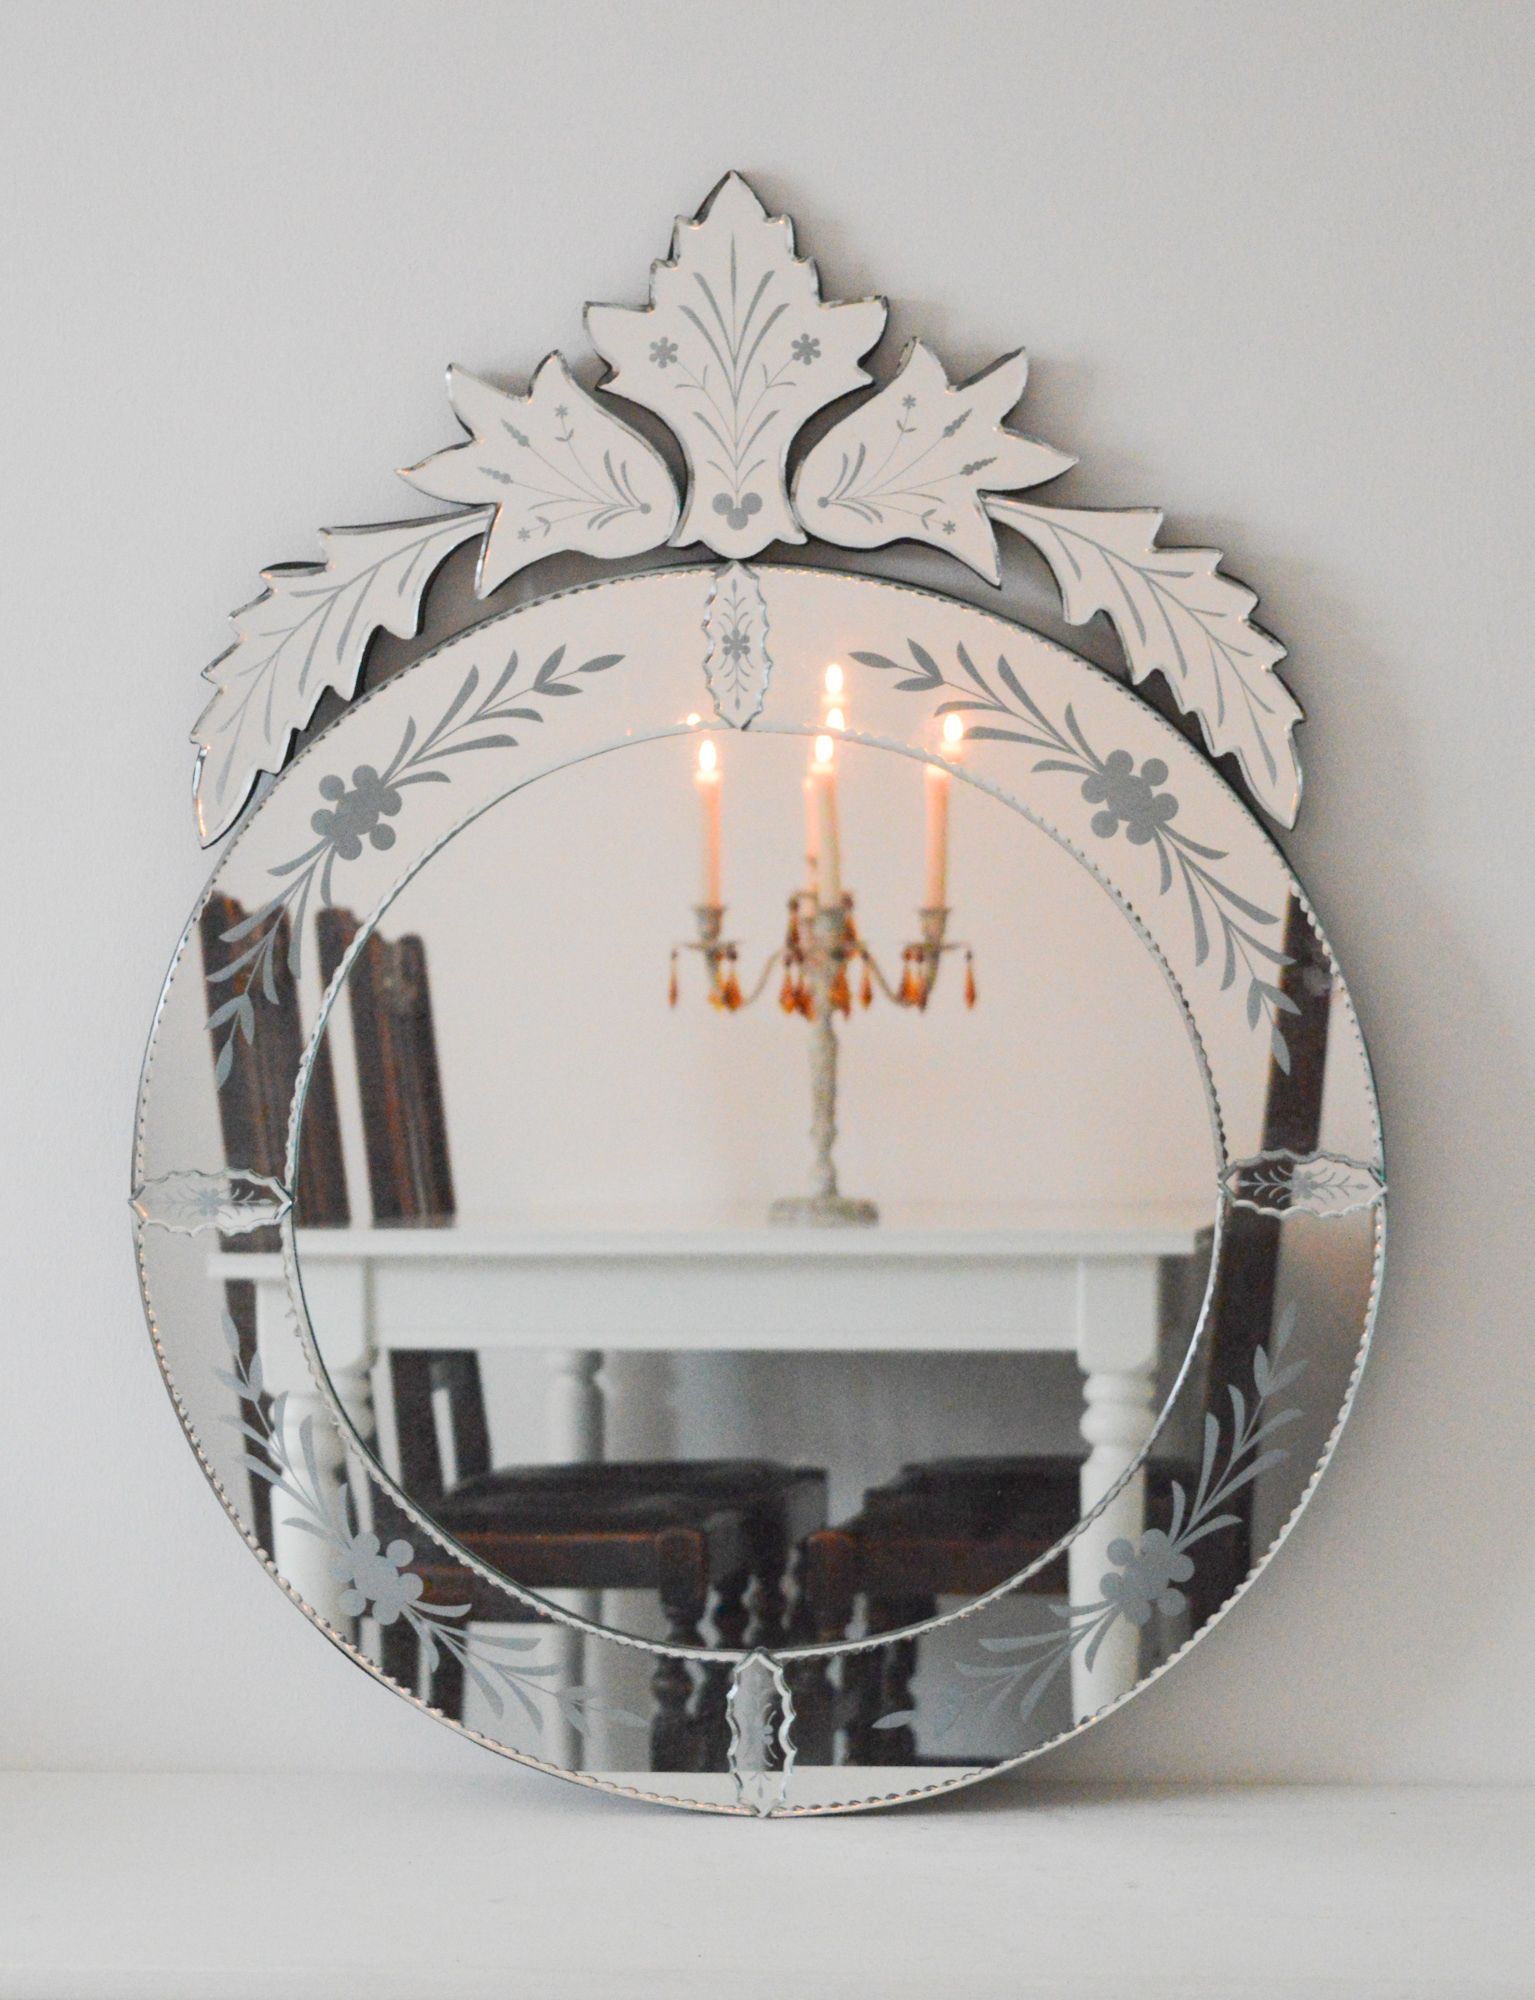 Vintage Venetian Style Wall Mirror, Large Round Decorative Mirror Throughout Decorative Round Wall Mirrors (View 11 of 15)